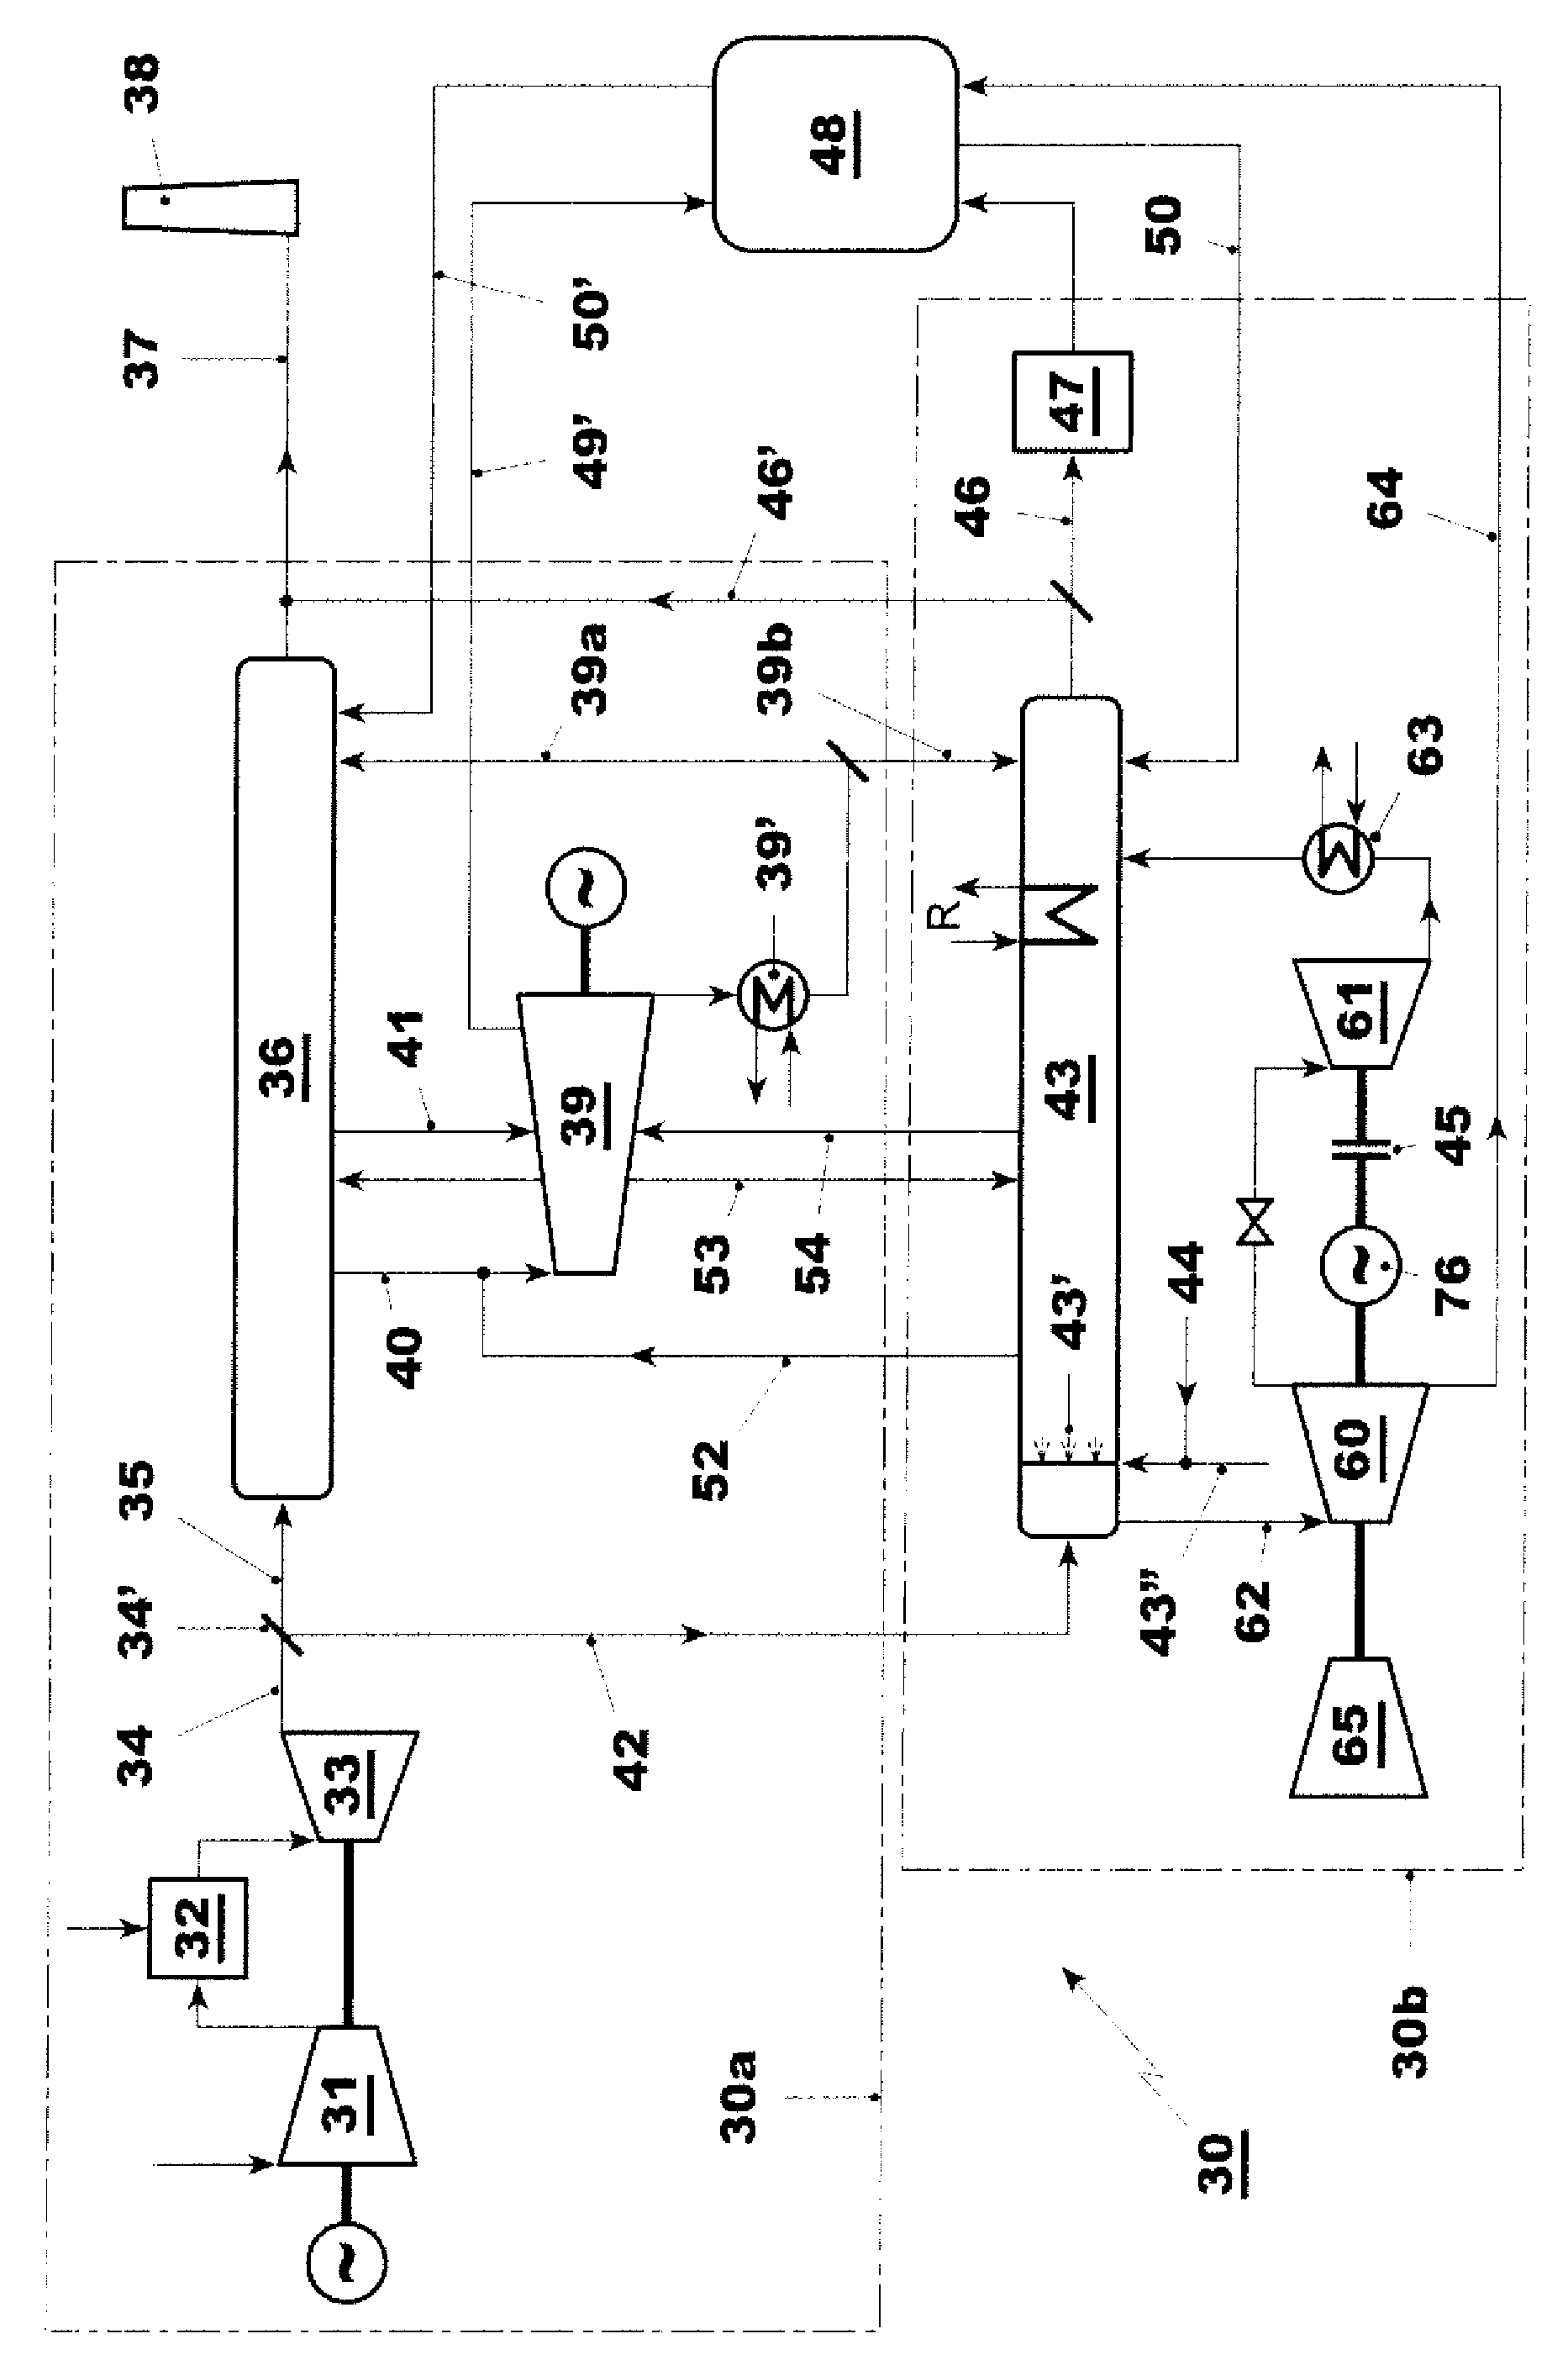 Combined cycle power plant with CO2 capture and method to operate it